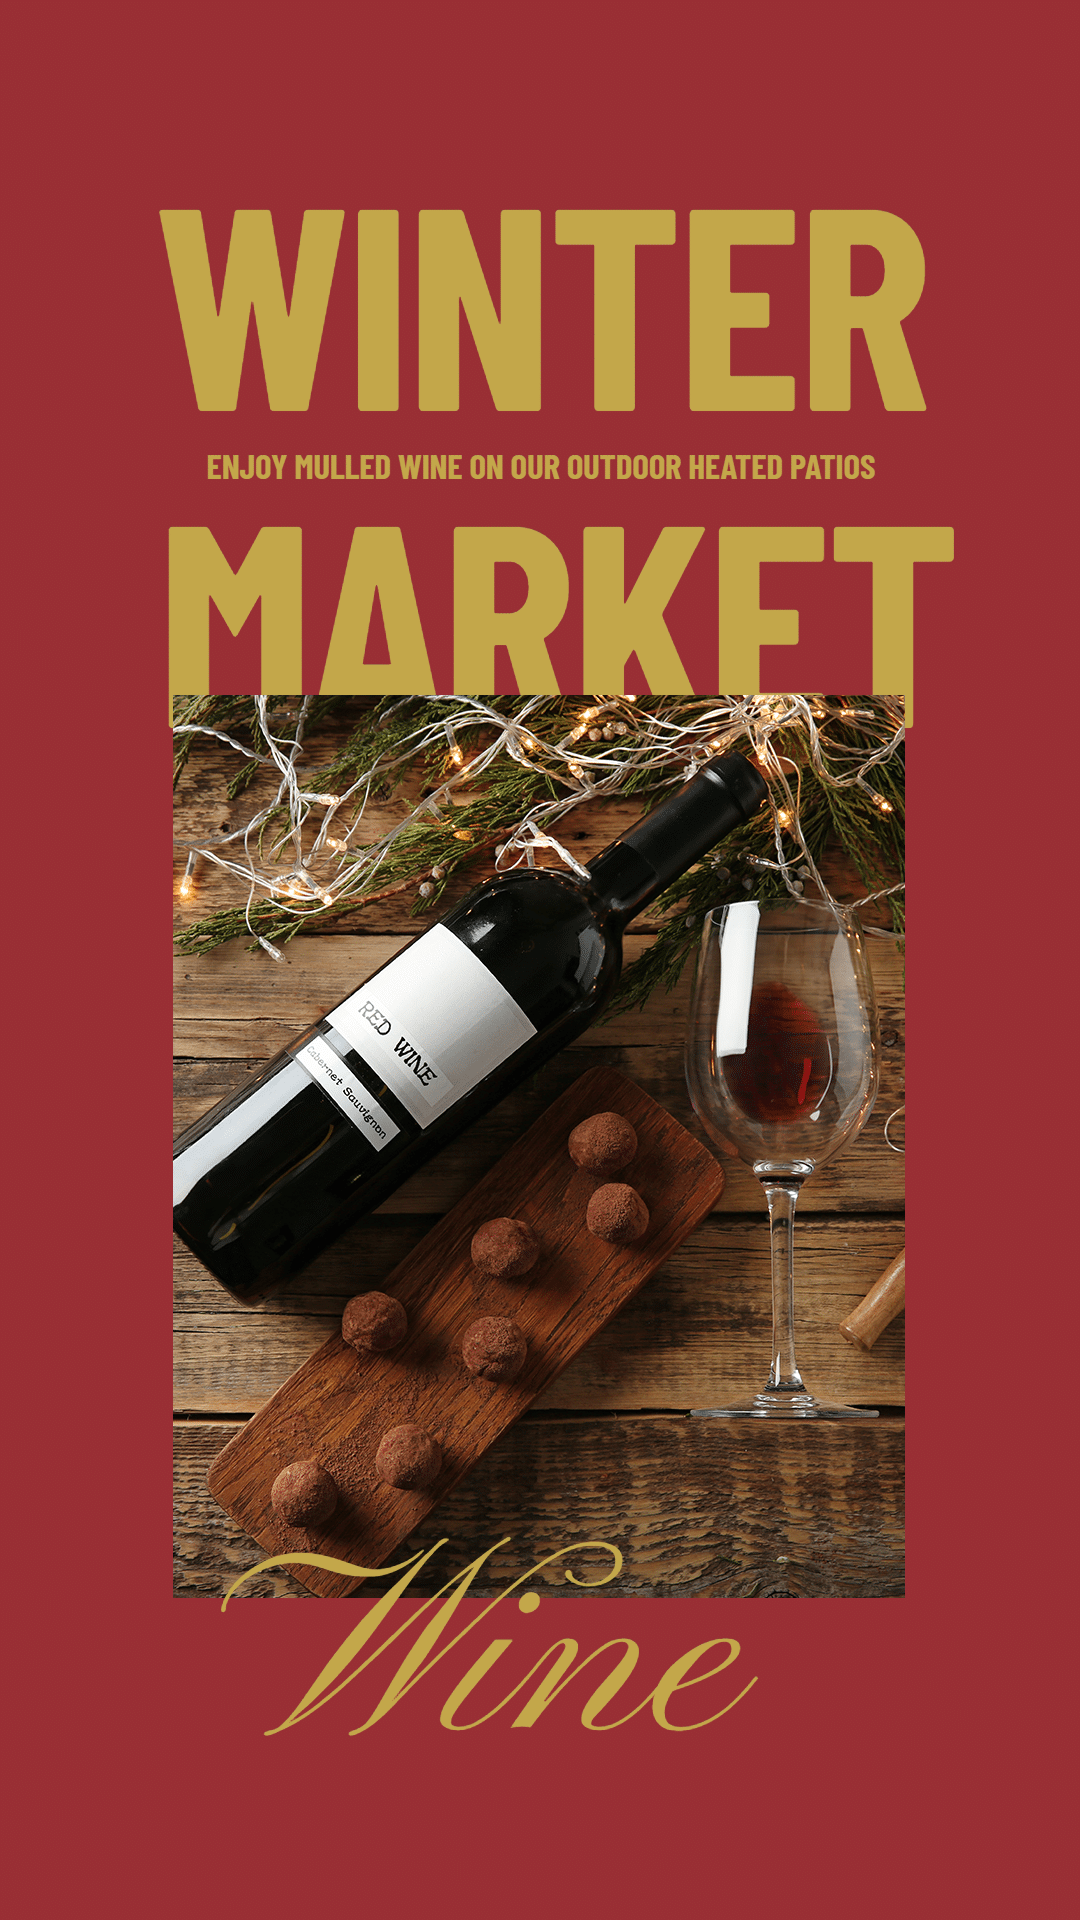 Winter Market Wine Display Photo Poster Ecommerce Story预览效果